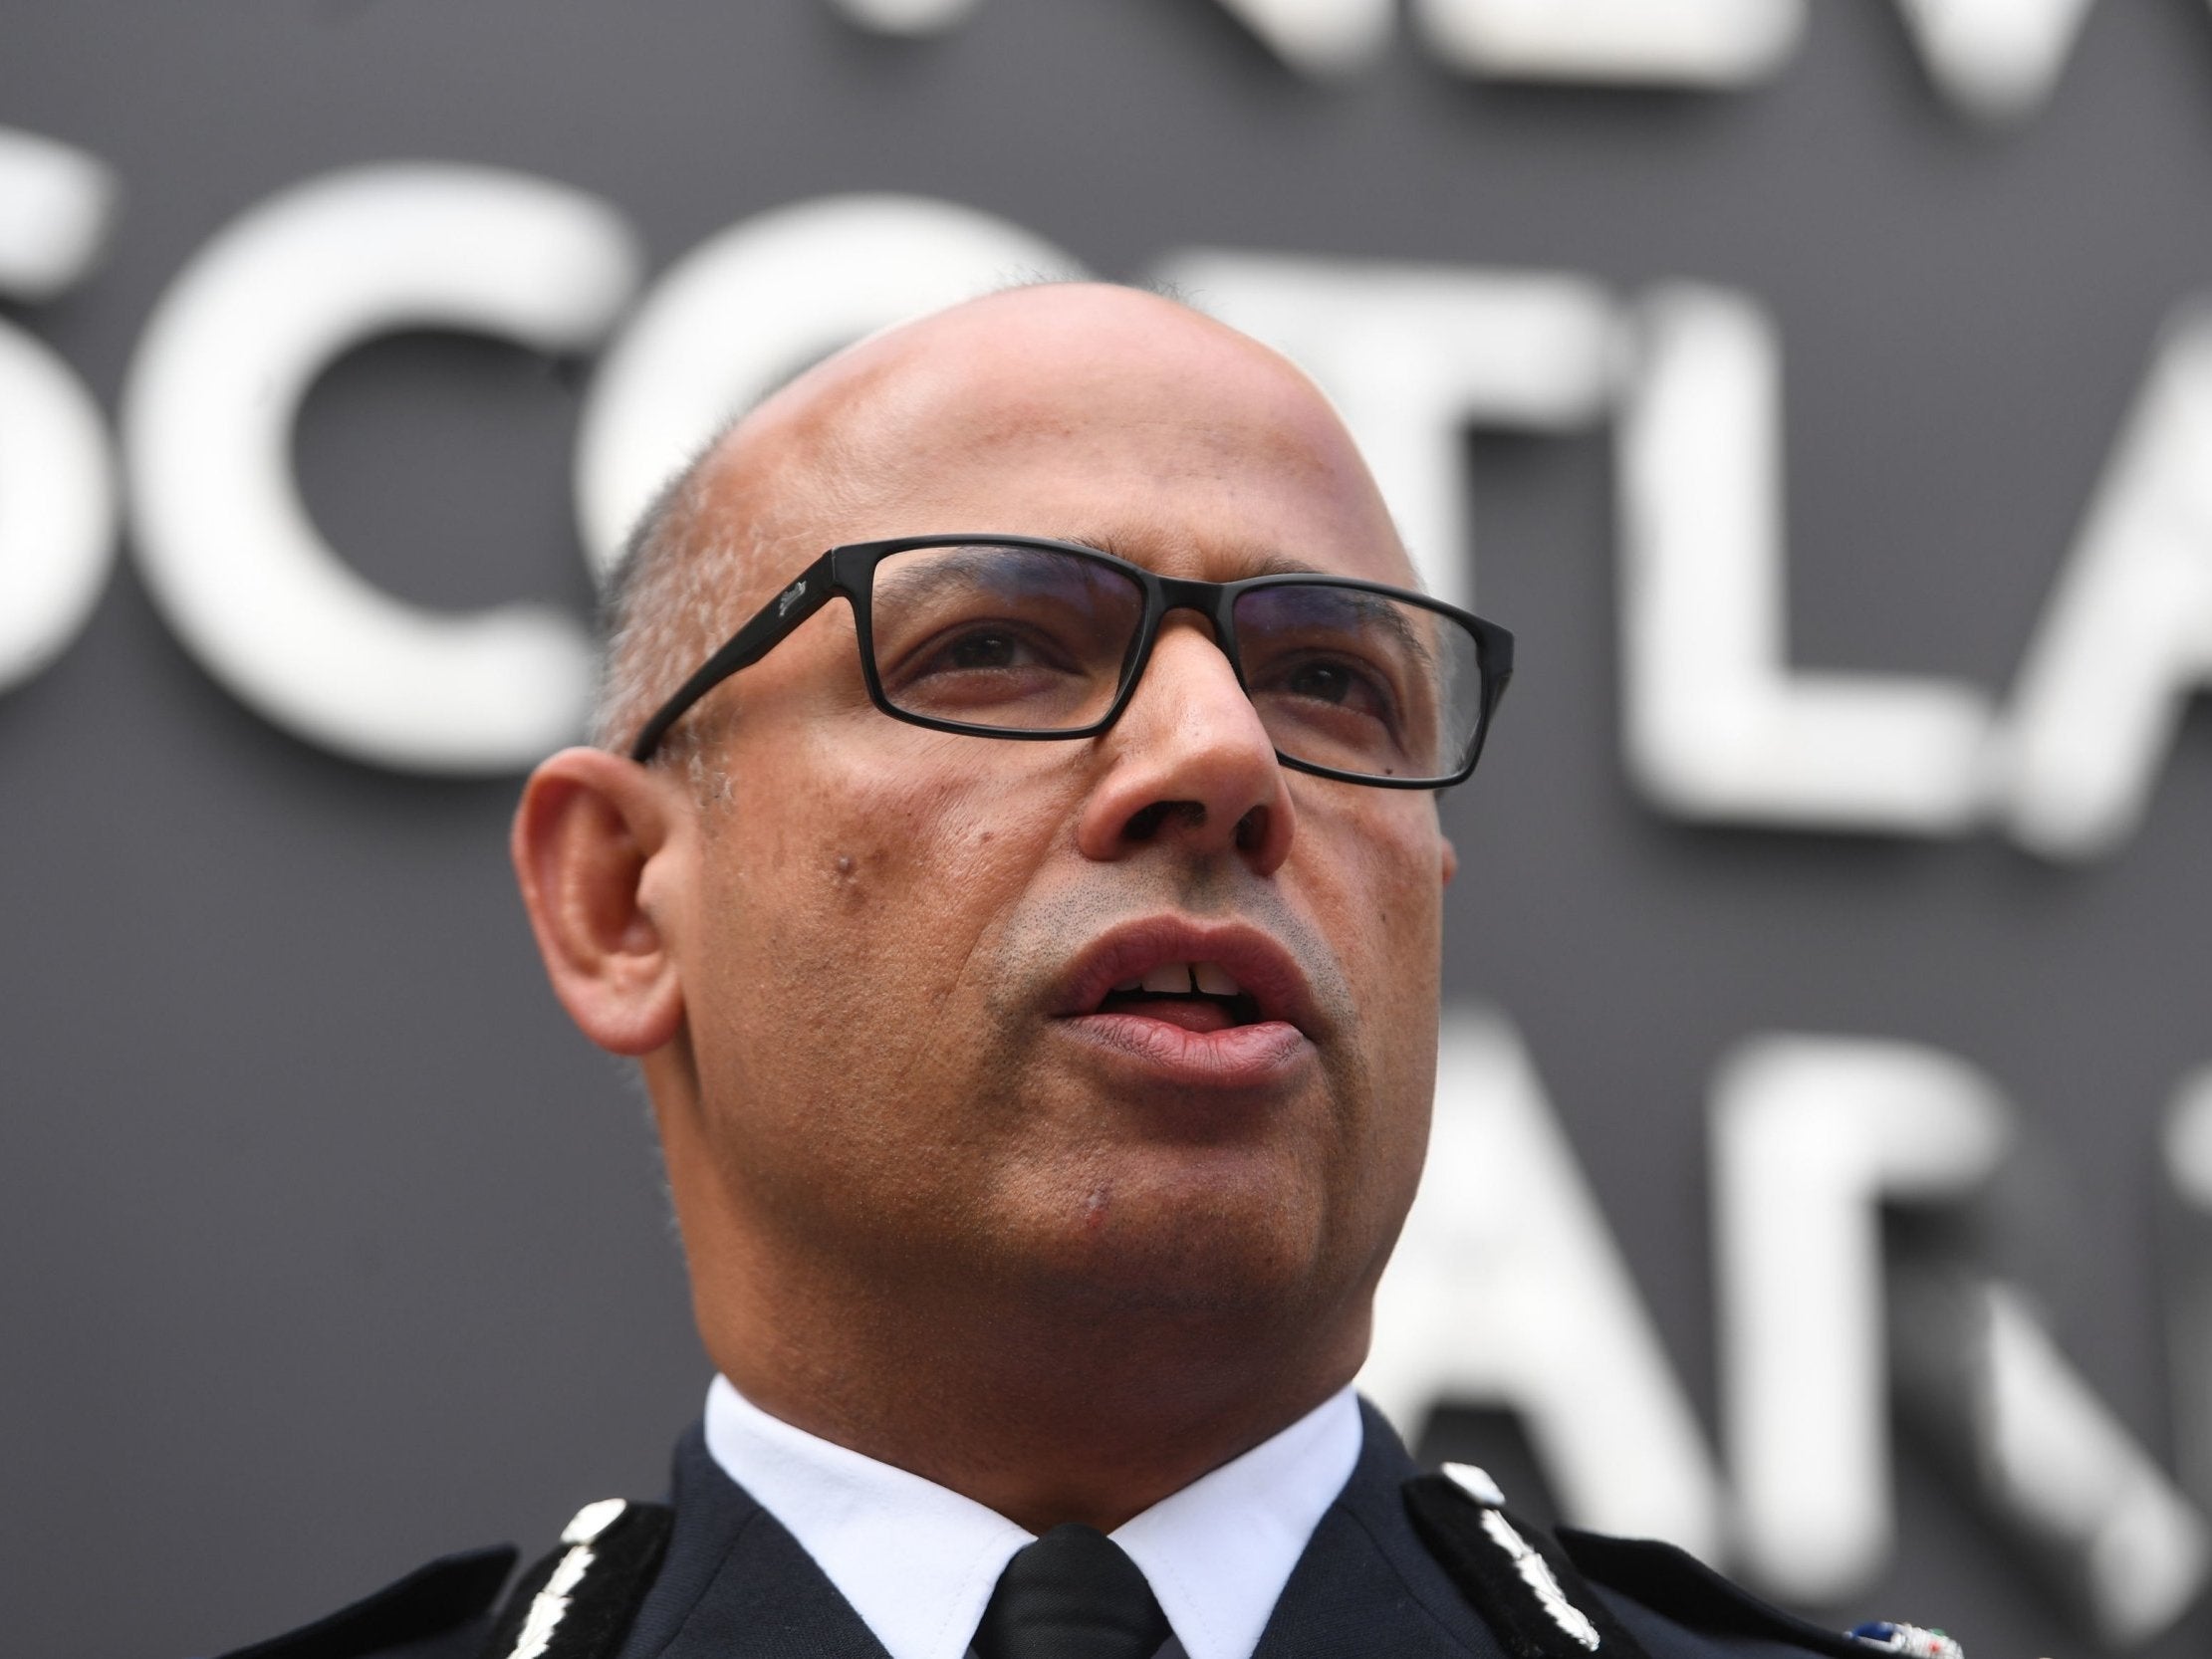 Metropolitan Police assistant commissioner Neil Basu says terror threat is ‘diverse and complex’